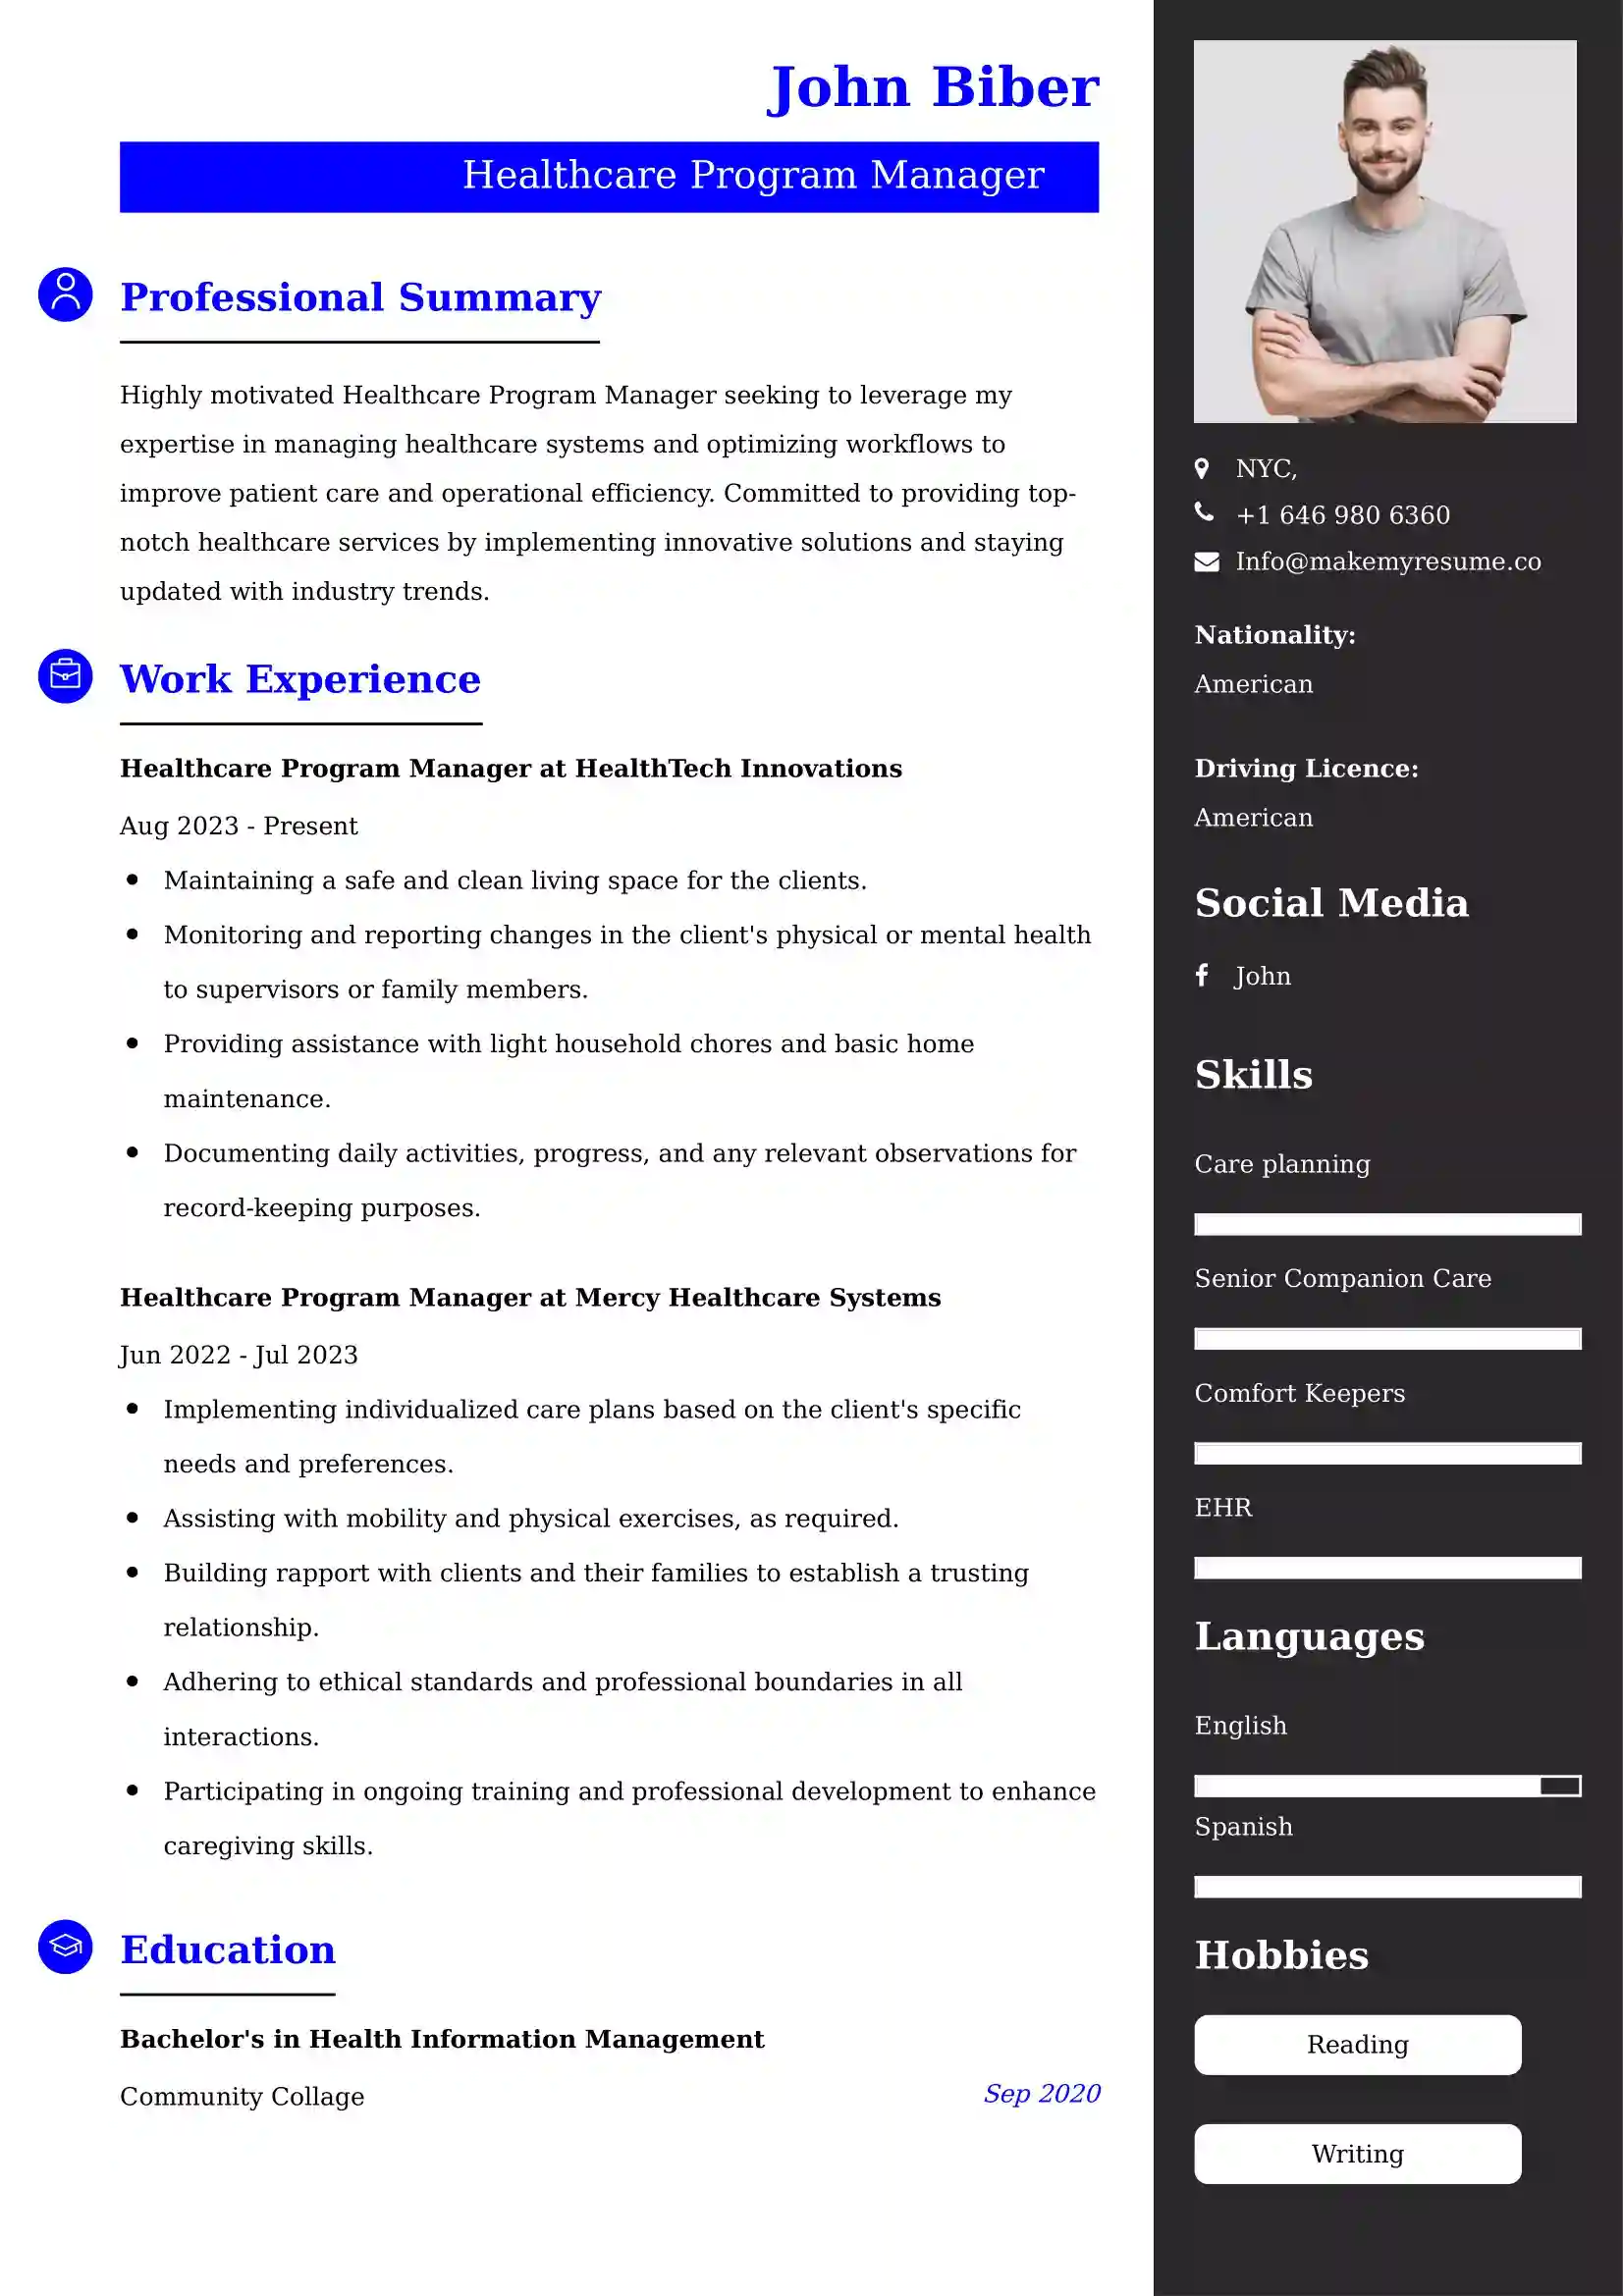 Healthcare Program Manager Resume Examples - Brazilian Format, Latest Template